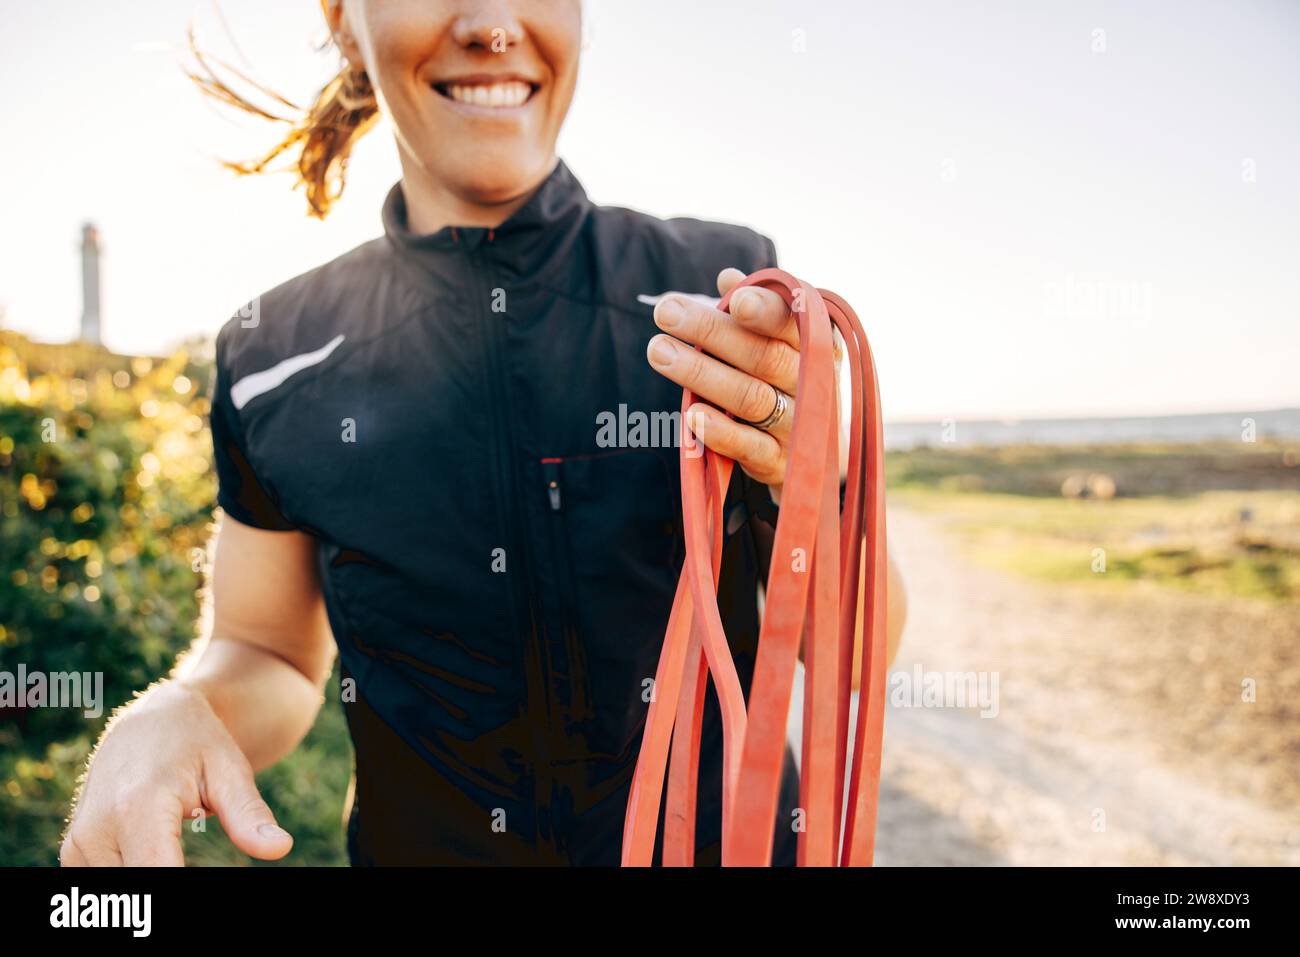 Midsection of smiling female coach holding resistance band at beach Stock Photo